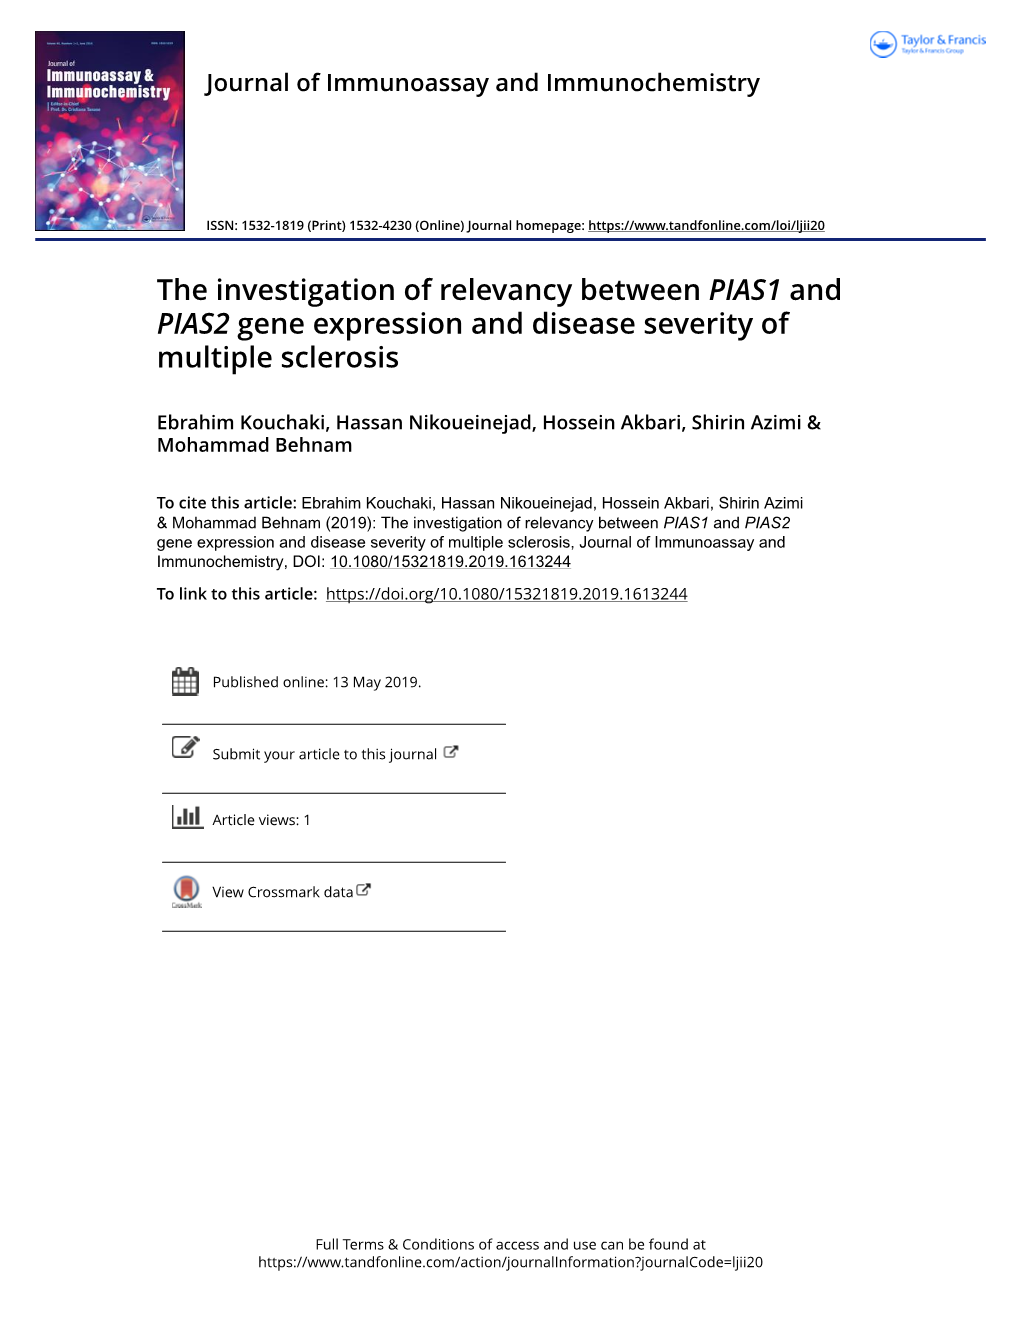 The Investigation of Relevancy Between PIAS1 and PIAS2 Gene Expression and Disease Severity of Multiple Sclerosis